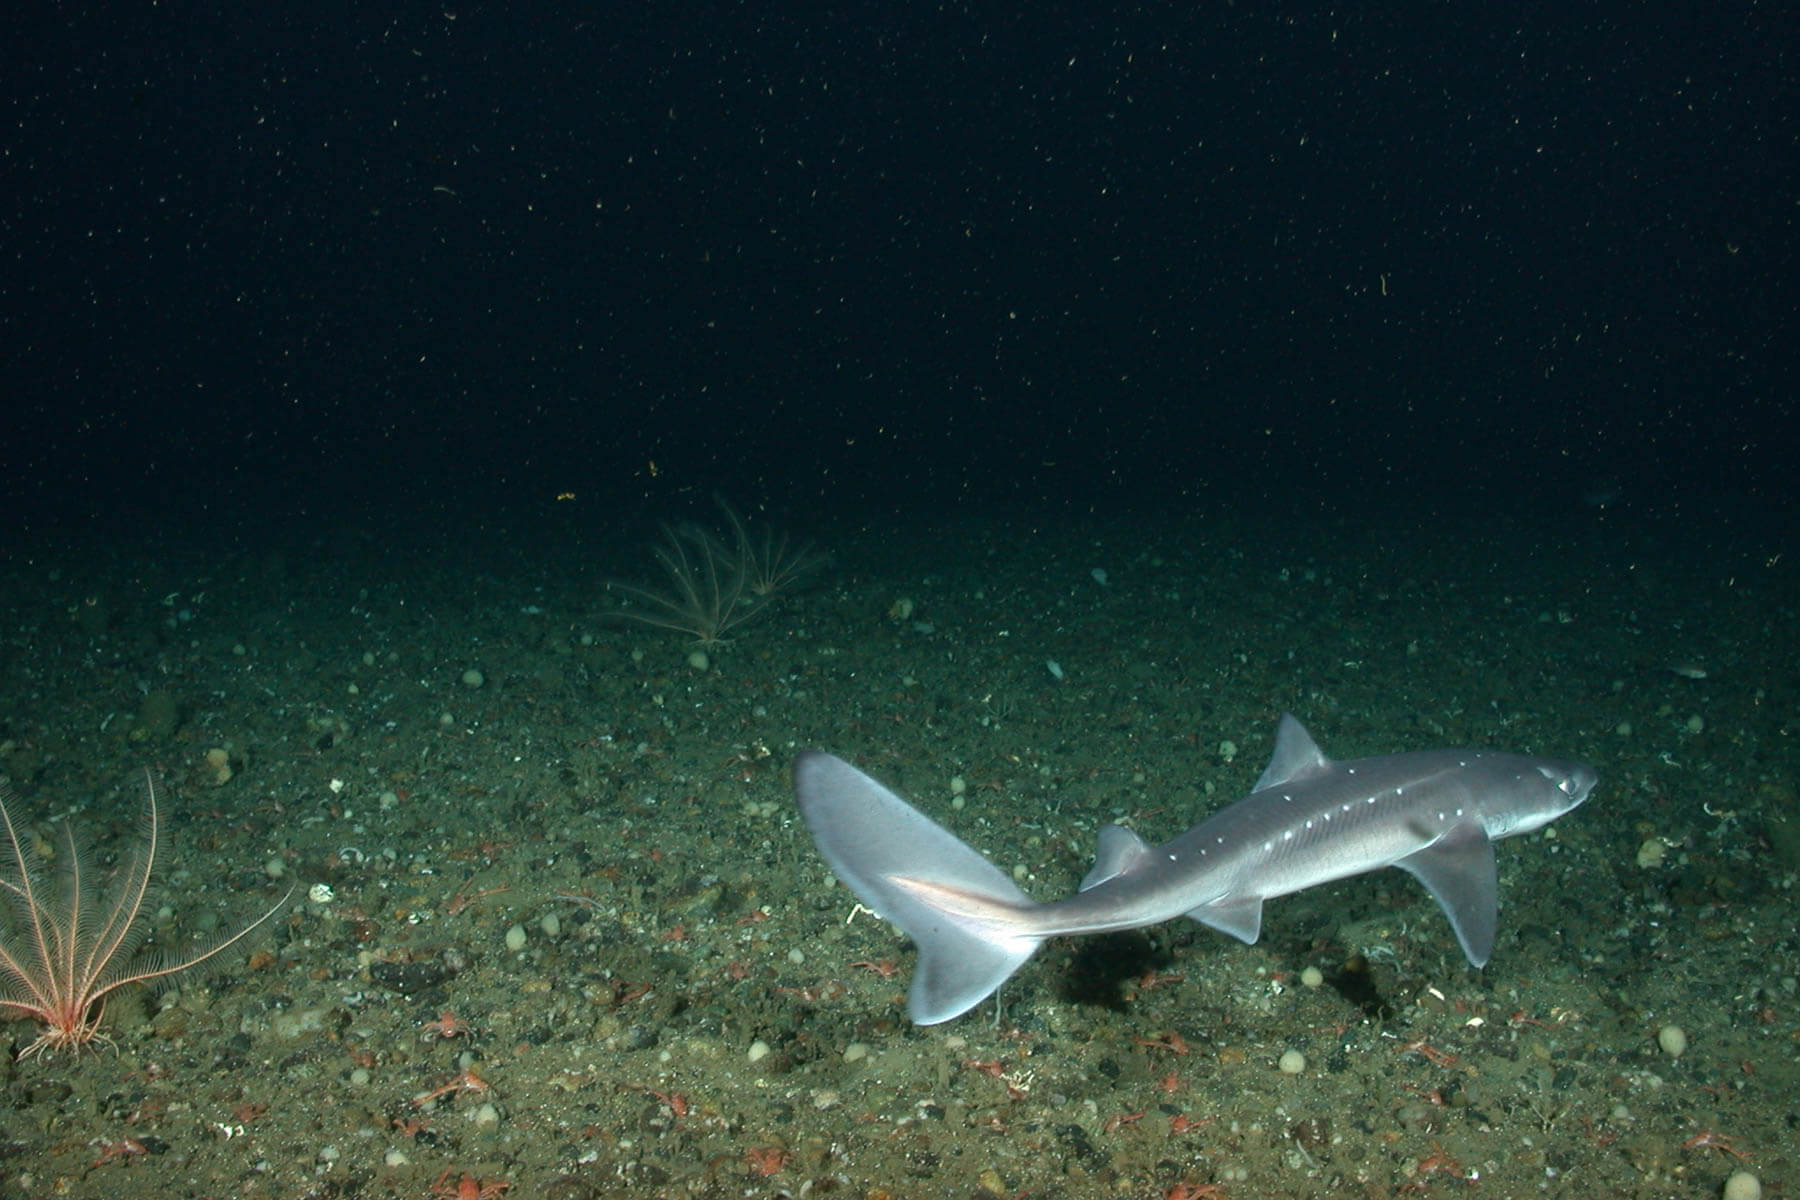 Spiny dogfish showing its spots